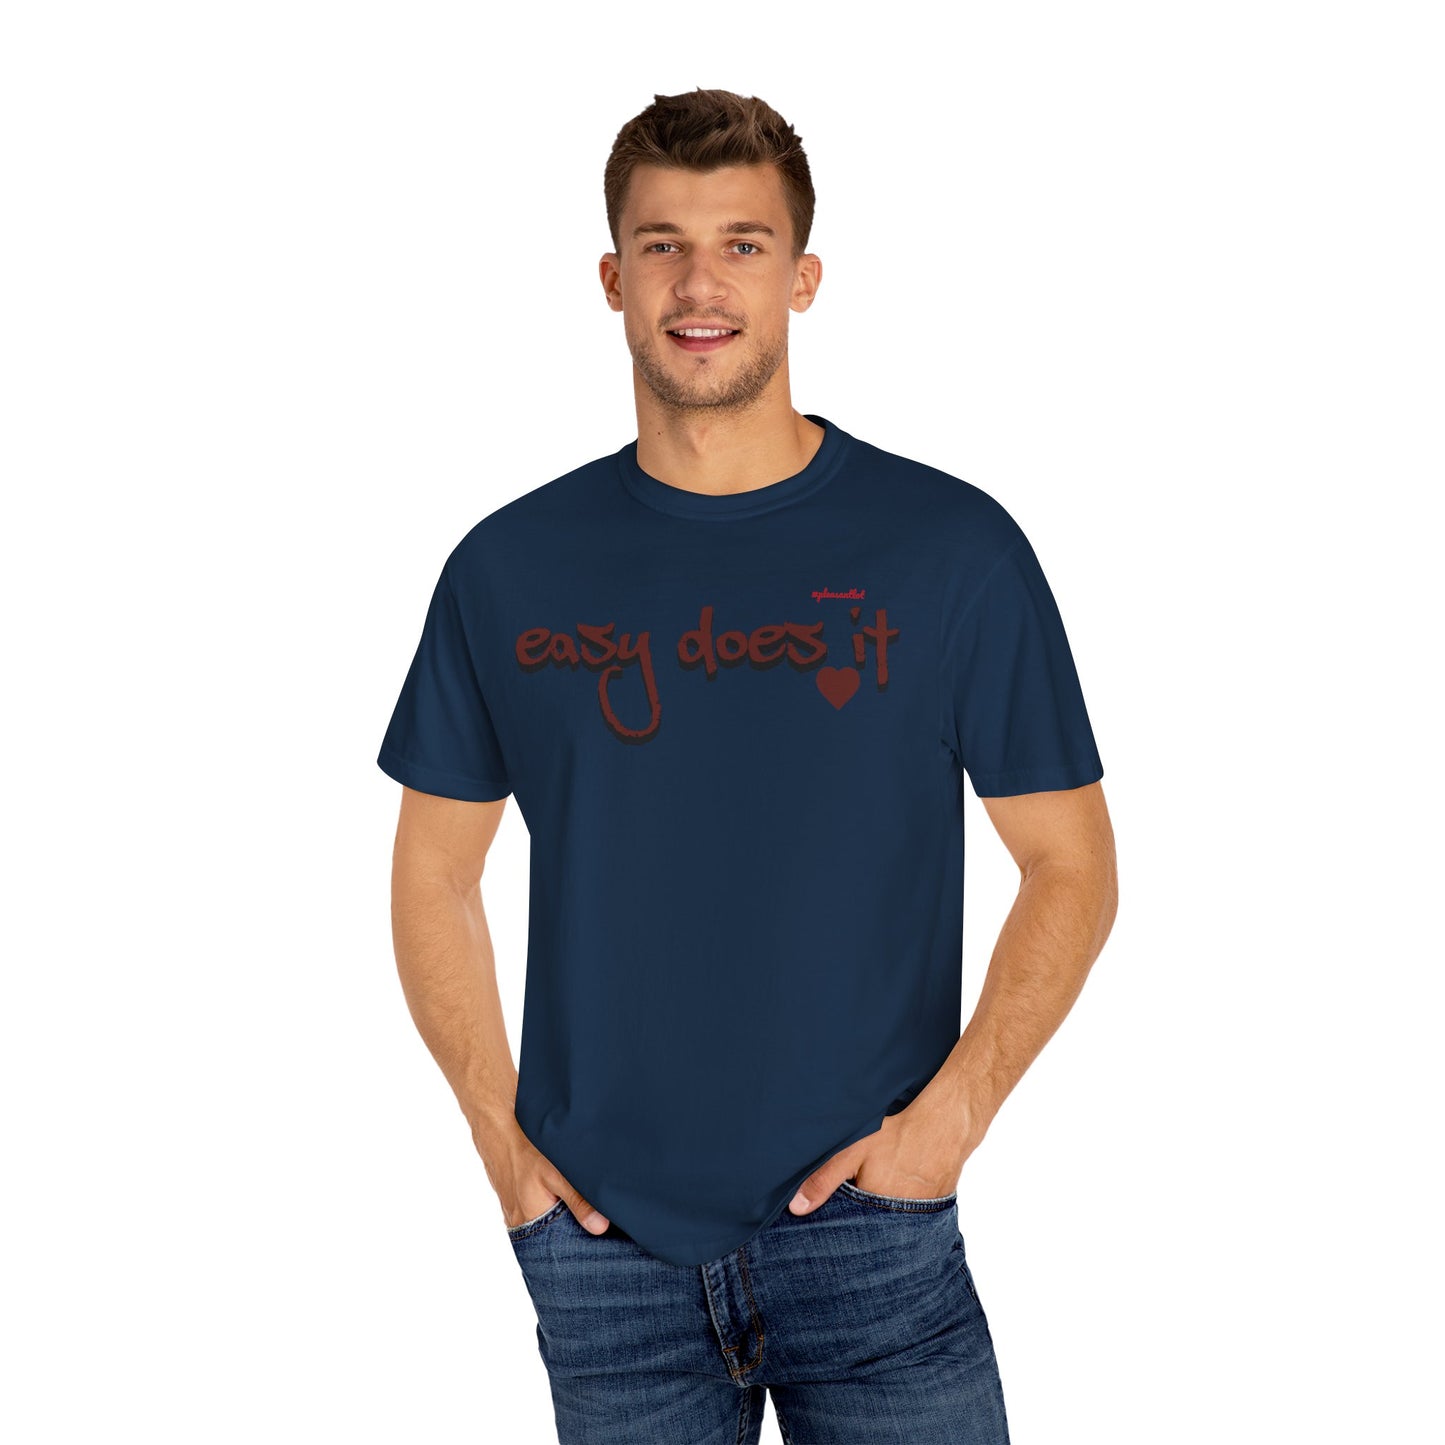 Easy Does it Unisex Garment-Dyed T-shirt